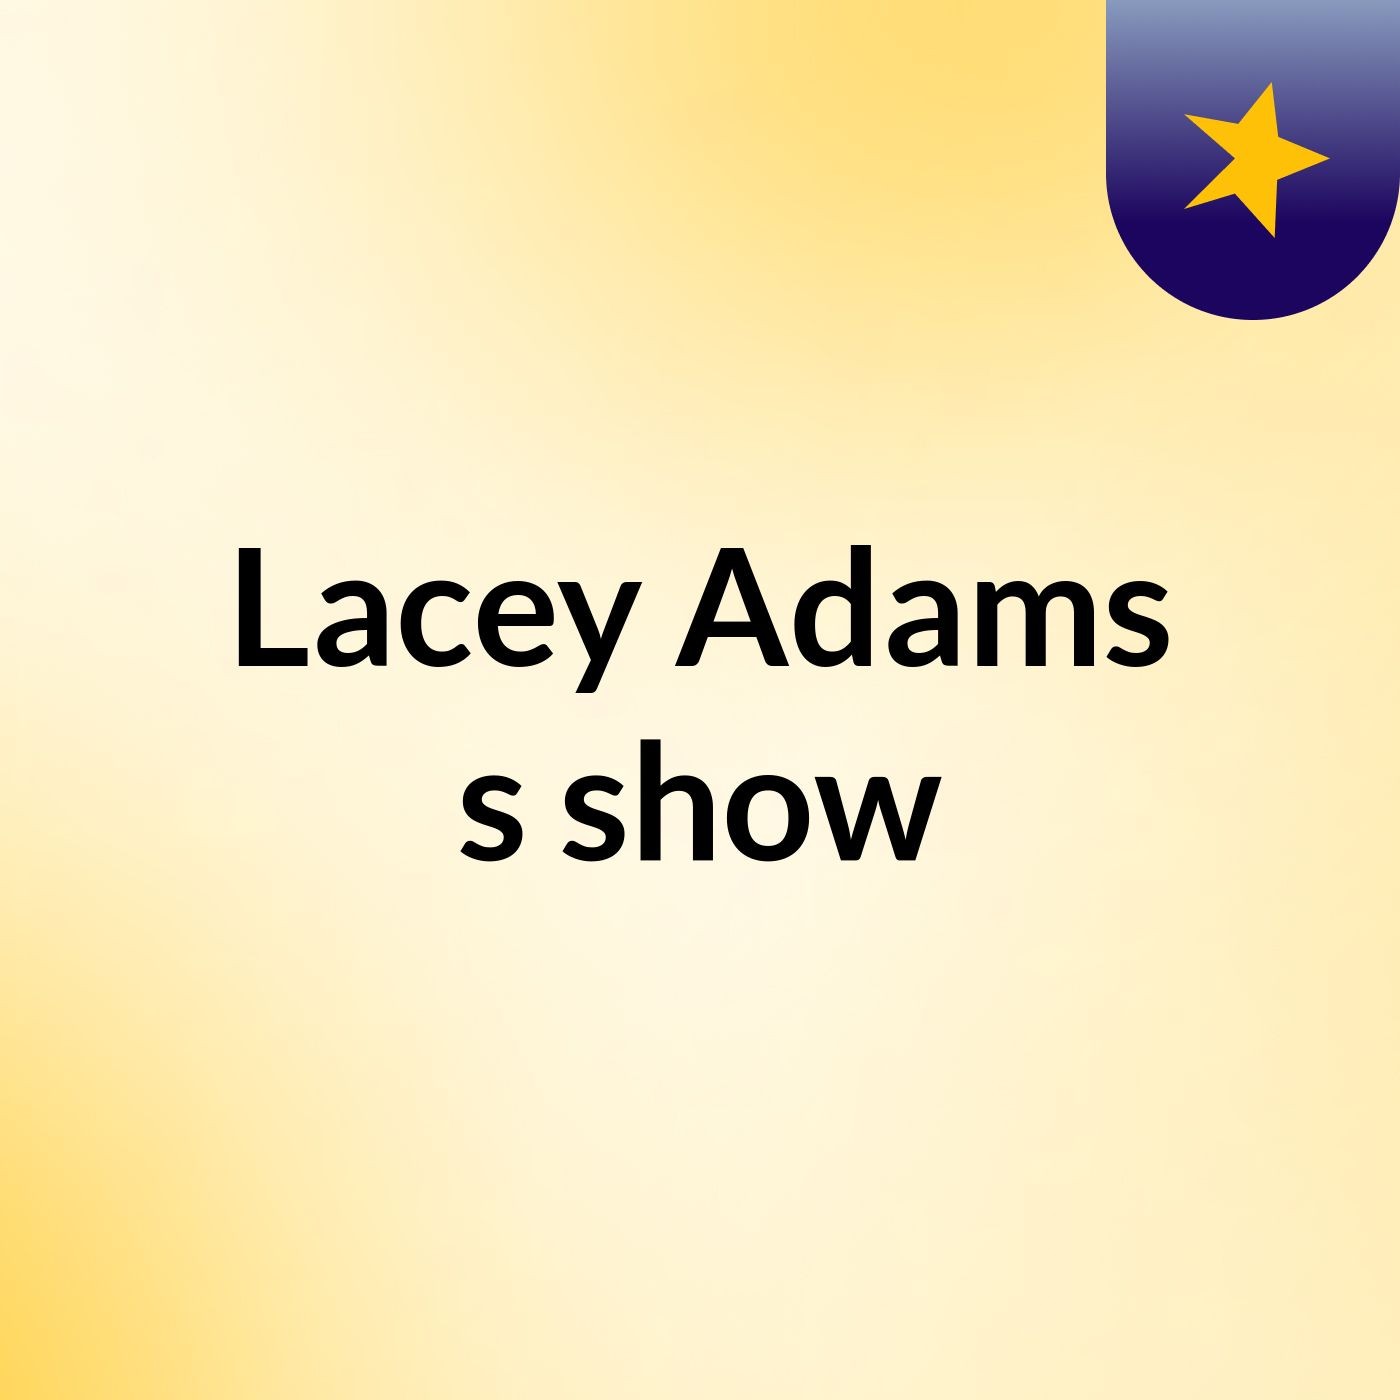 Lacey Adams's show